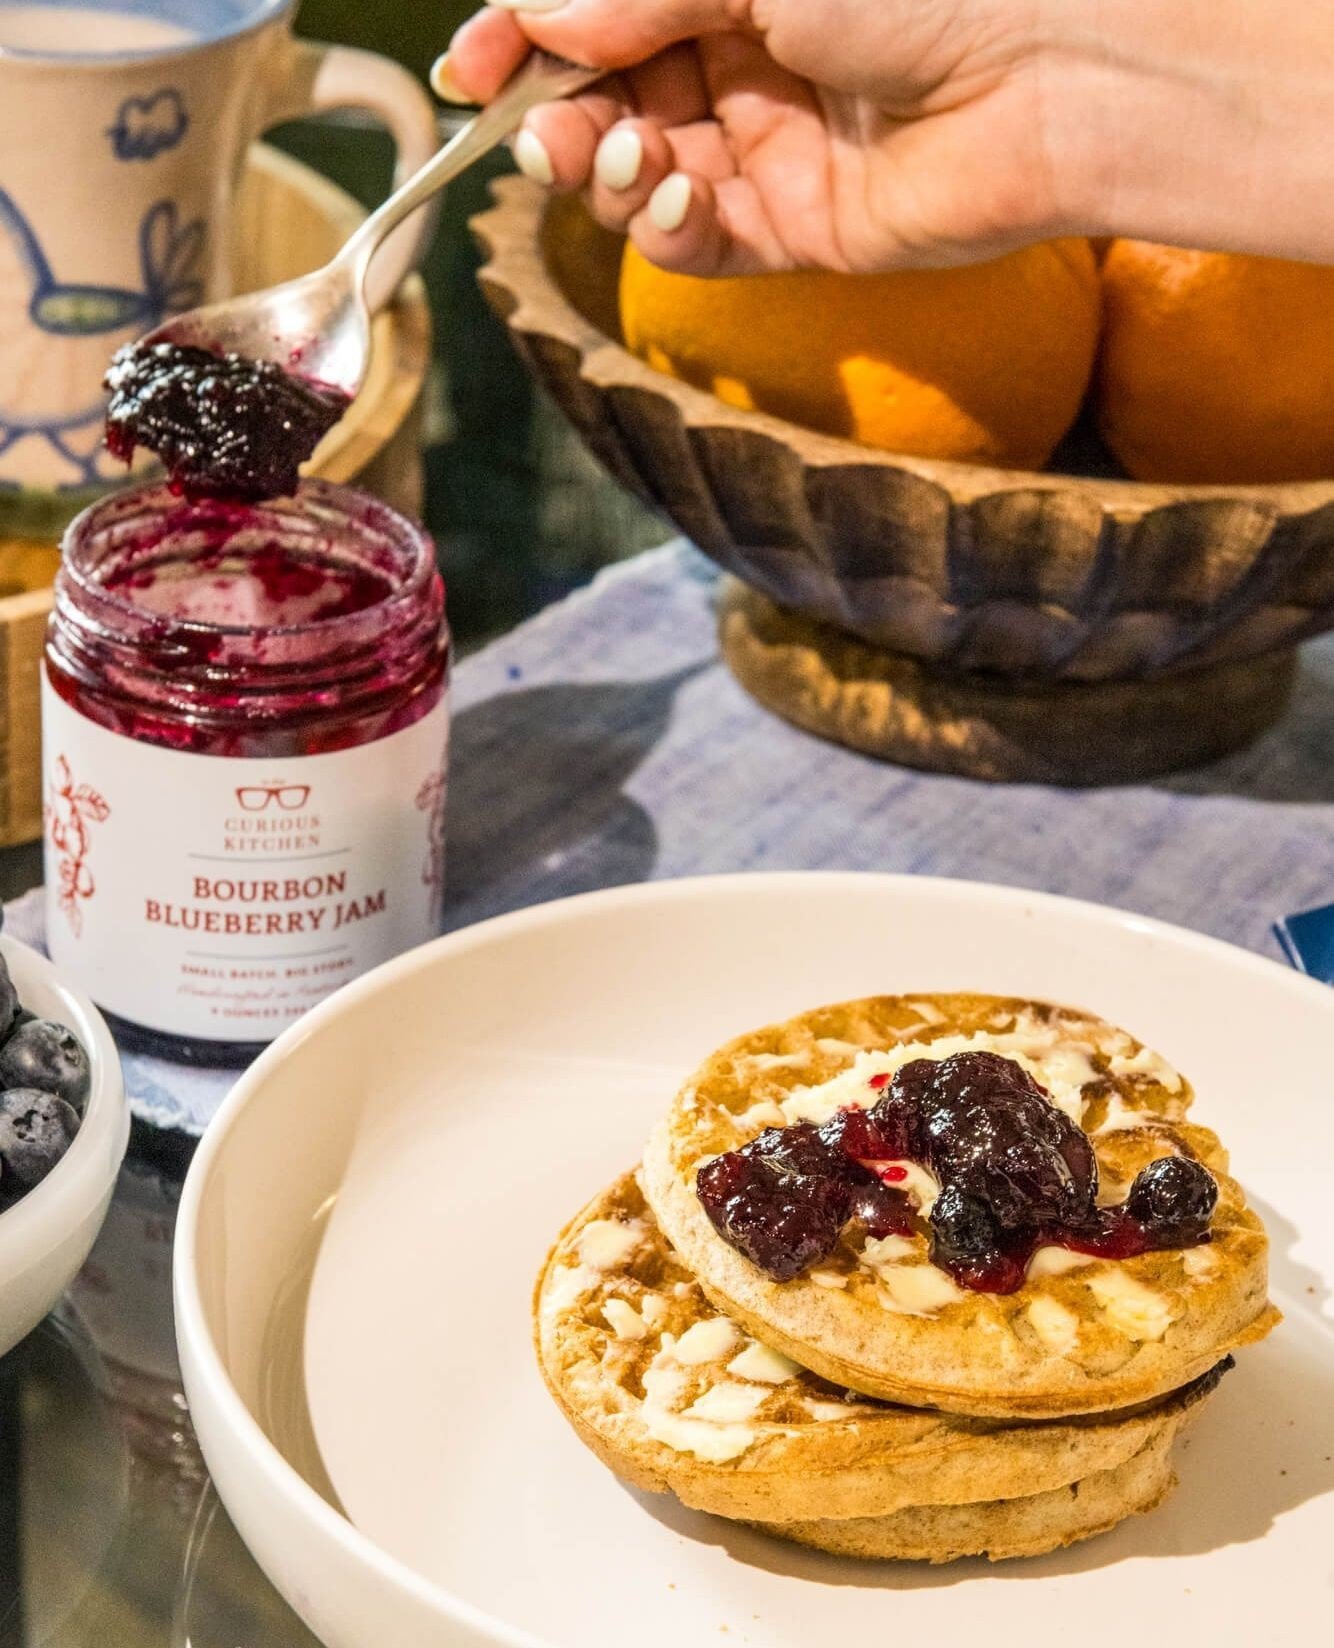 Brunching in style this Mother's Day with our signature Bourbon Blueberry Jam to top of your fresh breakfast with a Southern touch! Indulge Mom with a sweet surprise she'll savor to the last bite! ⁠
⁠
Delicious stirred into a cocktail too.⁠
⁠
Shop in